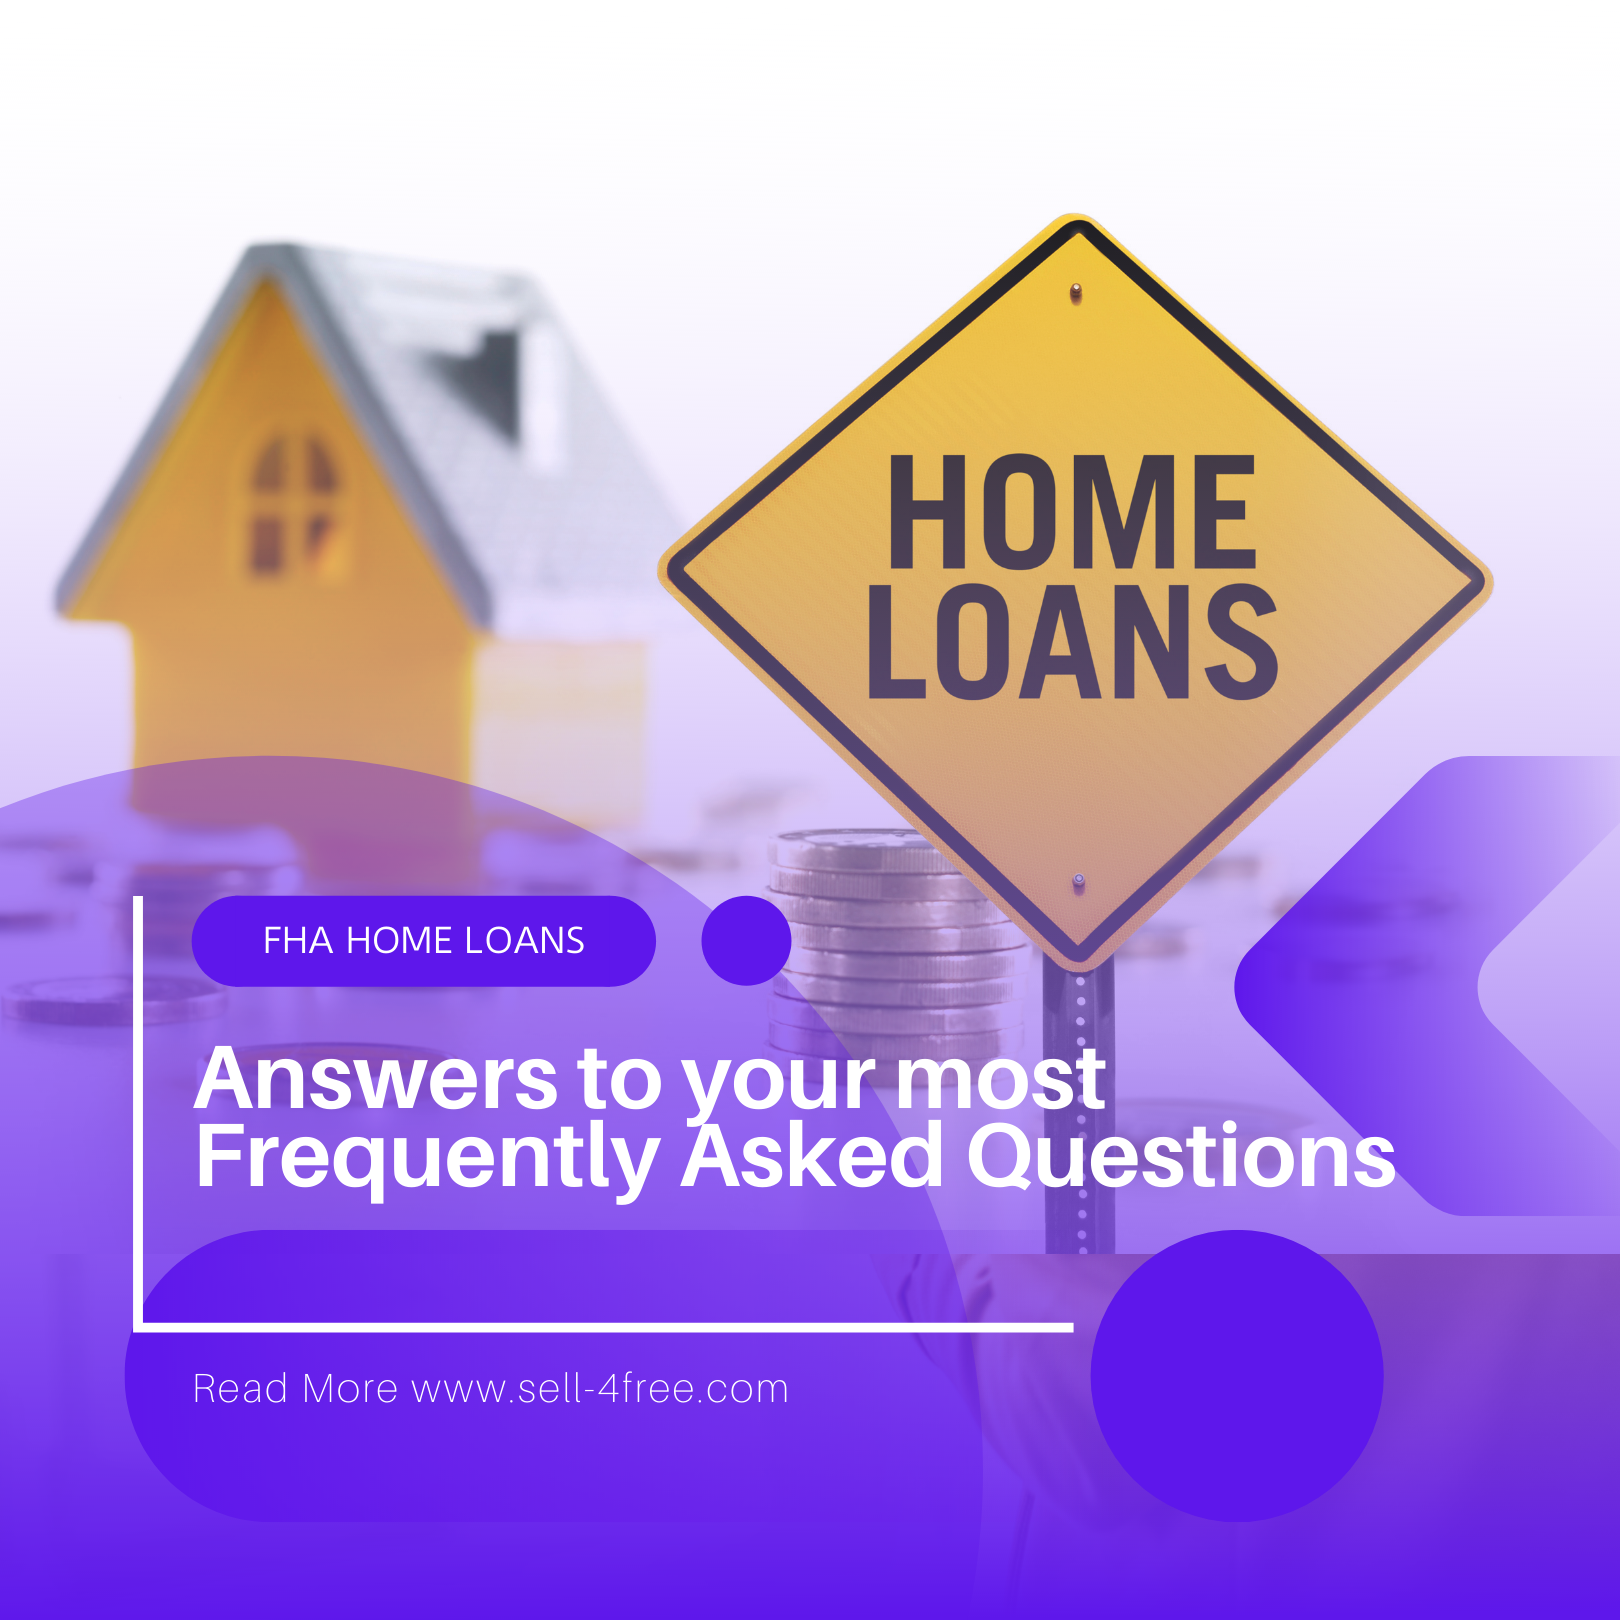 FHA Home Loans – Answers to your Most Frequently Asked Questions